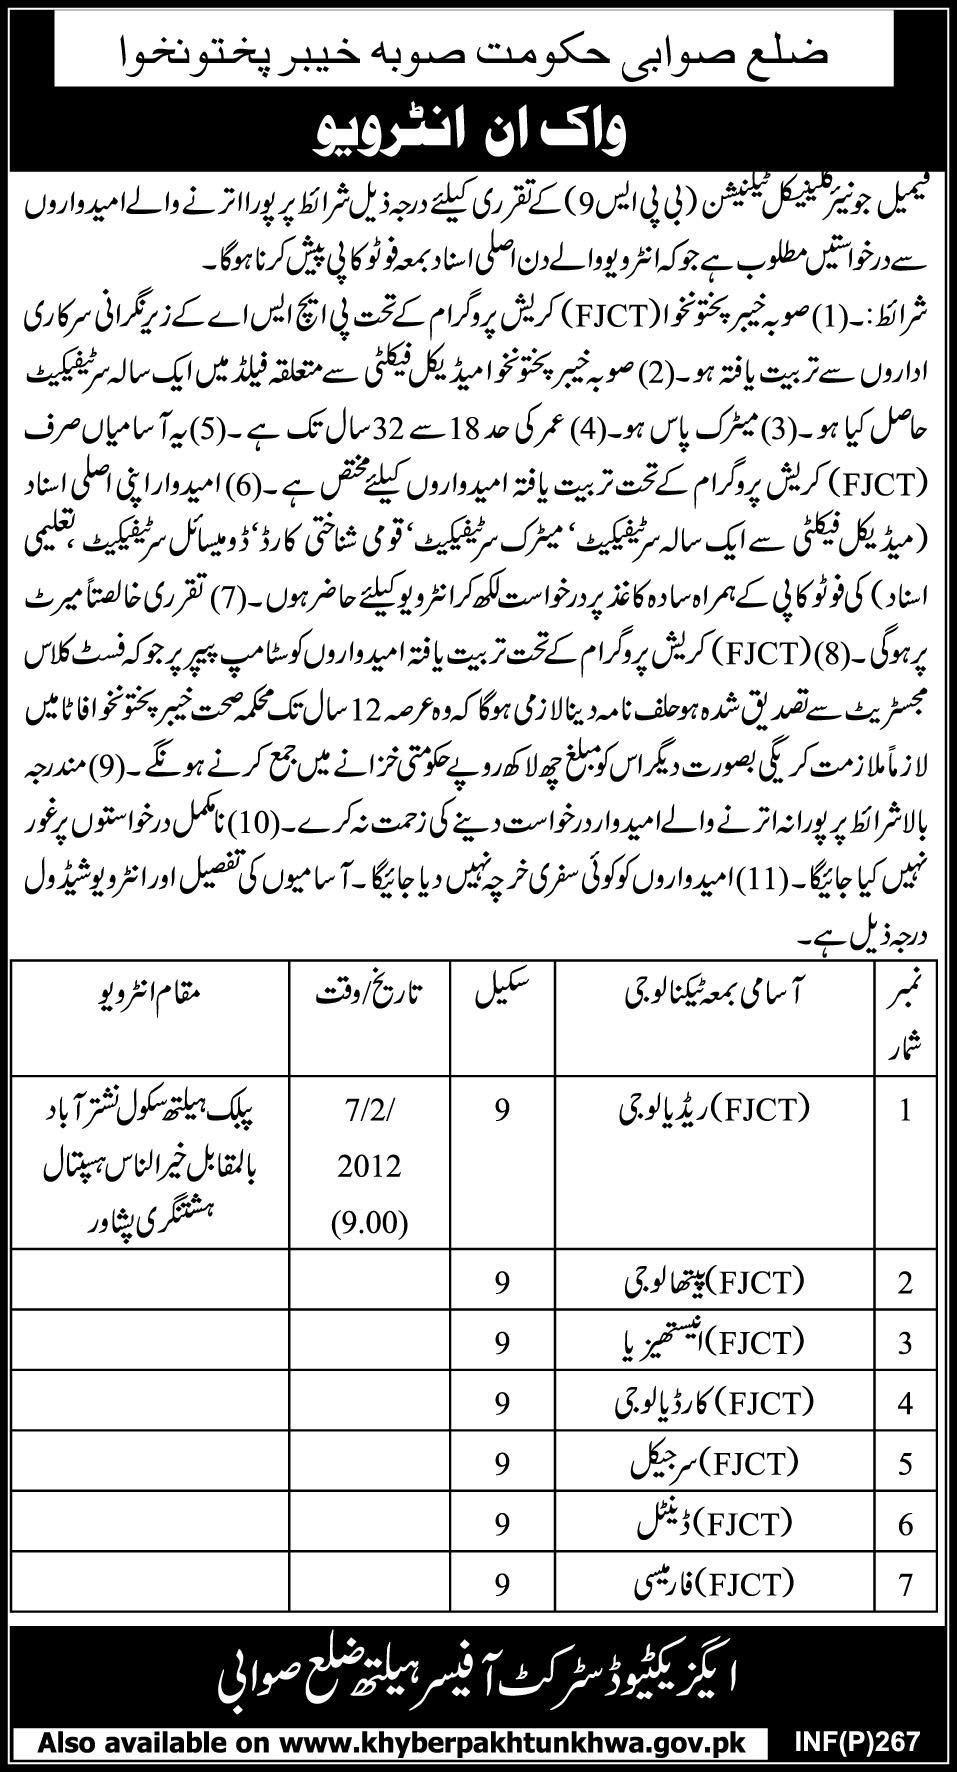 Female Junior Clinical Technician Required by KPK Government